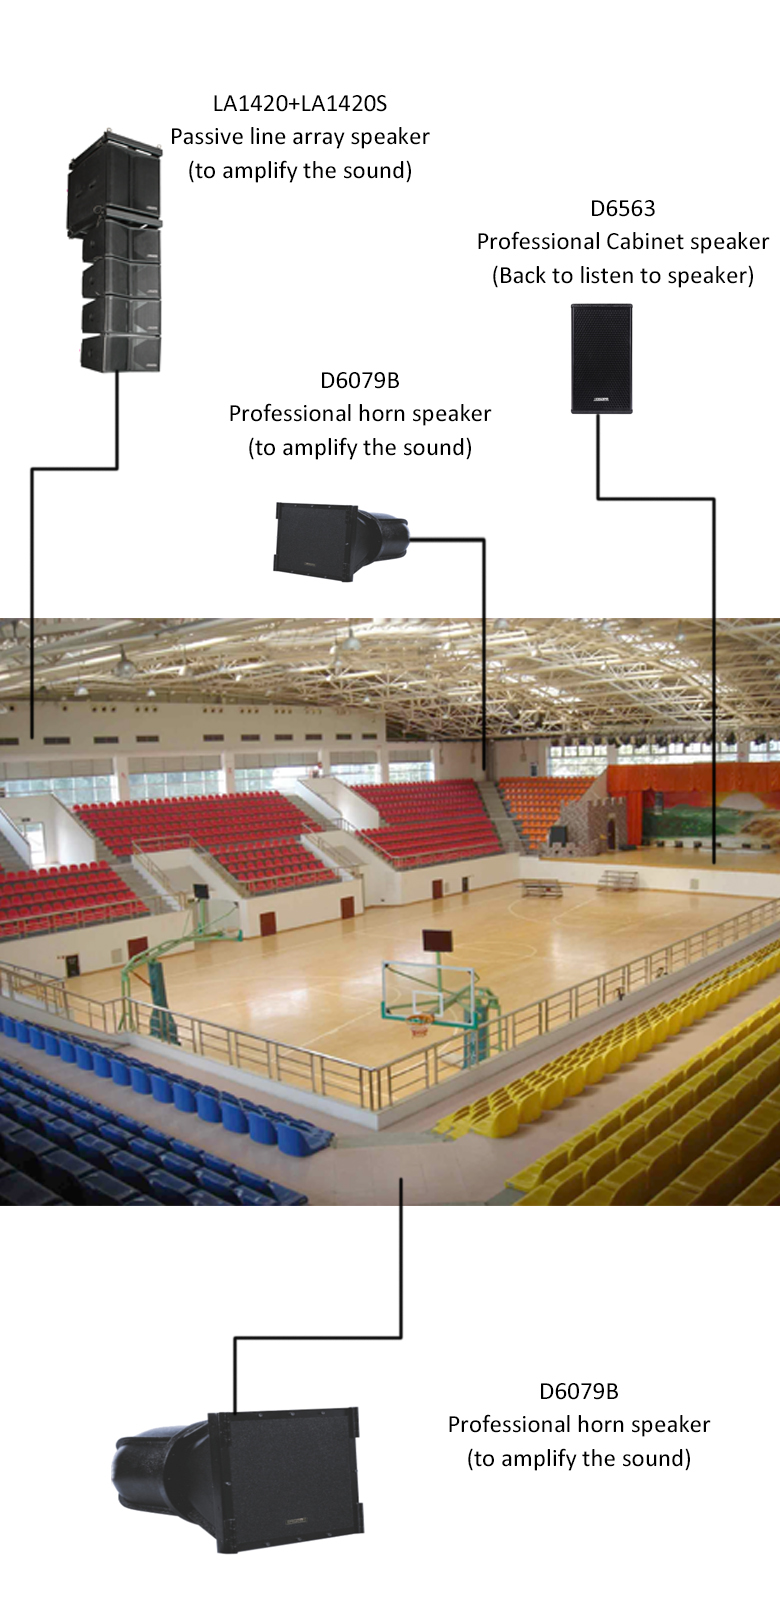 Professional Audio PA Solution for Gymnasium